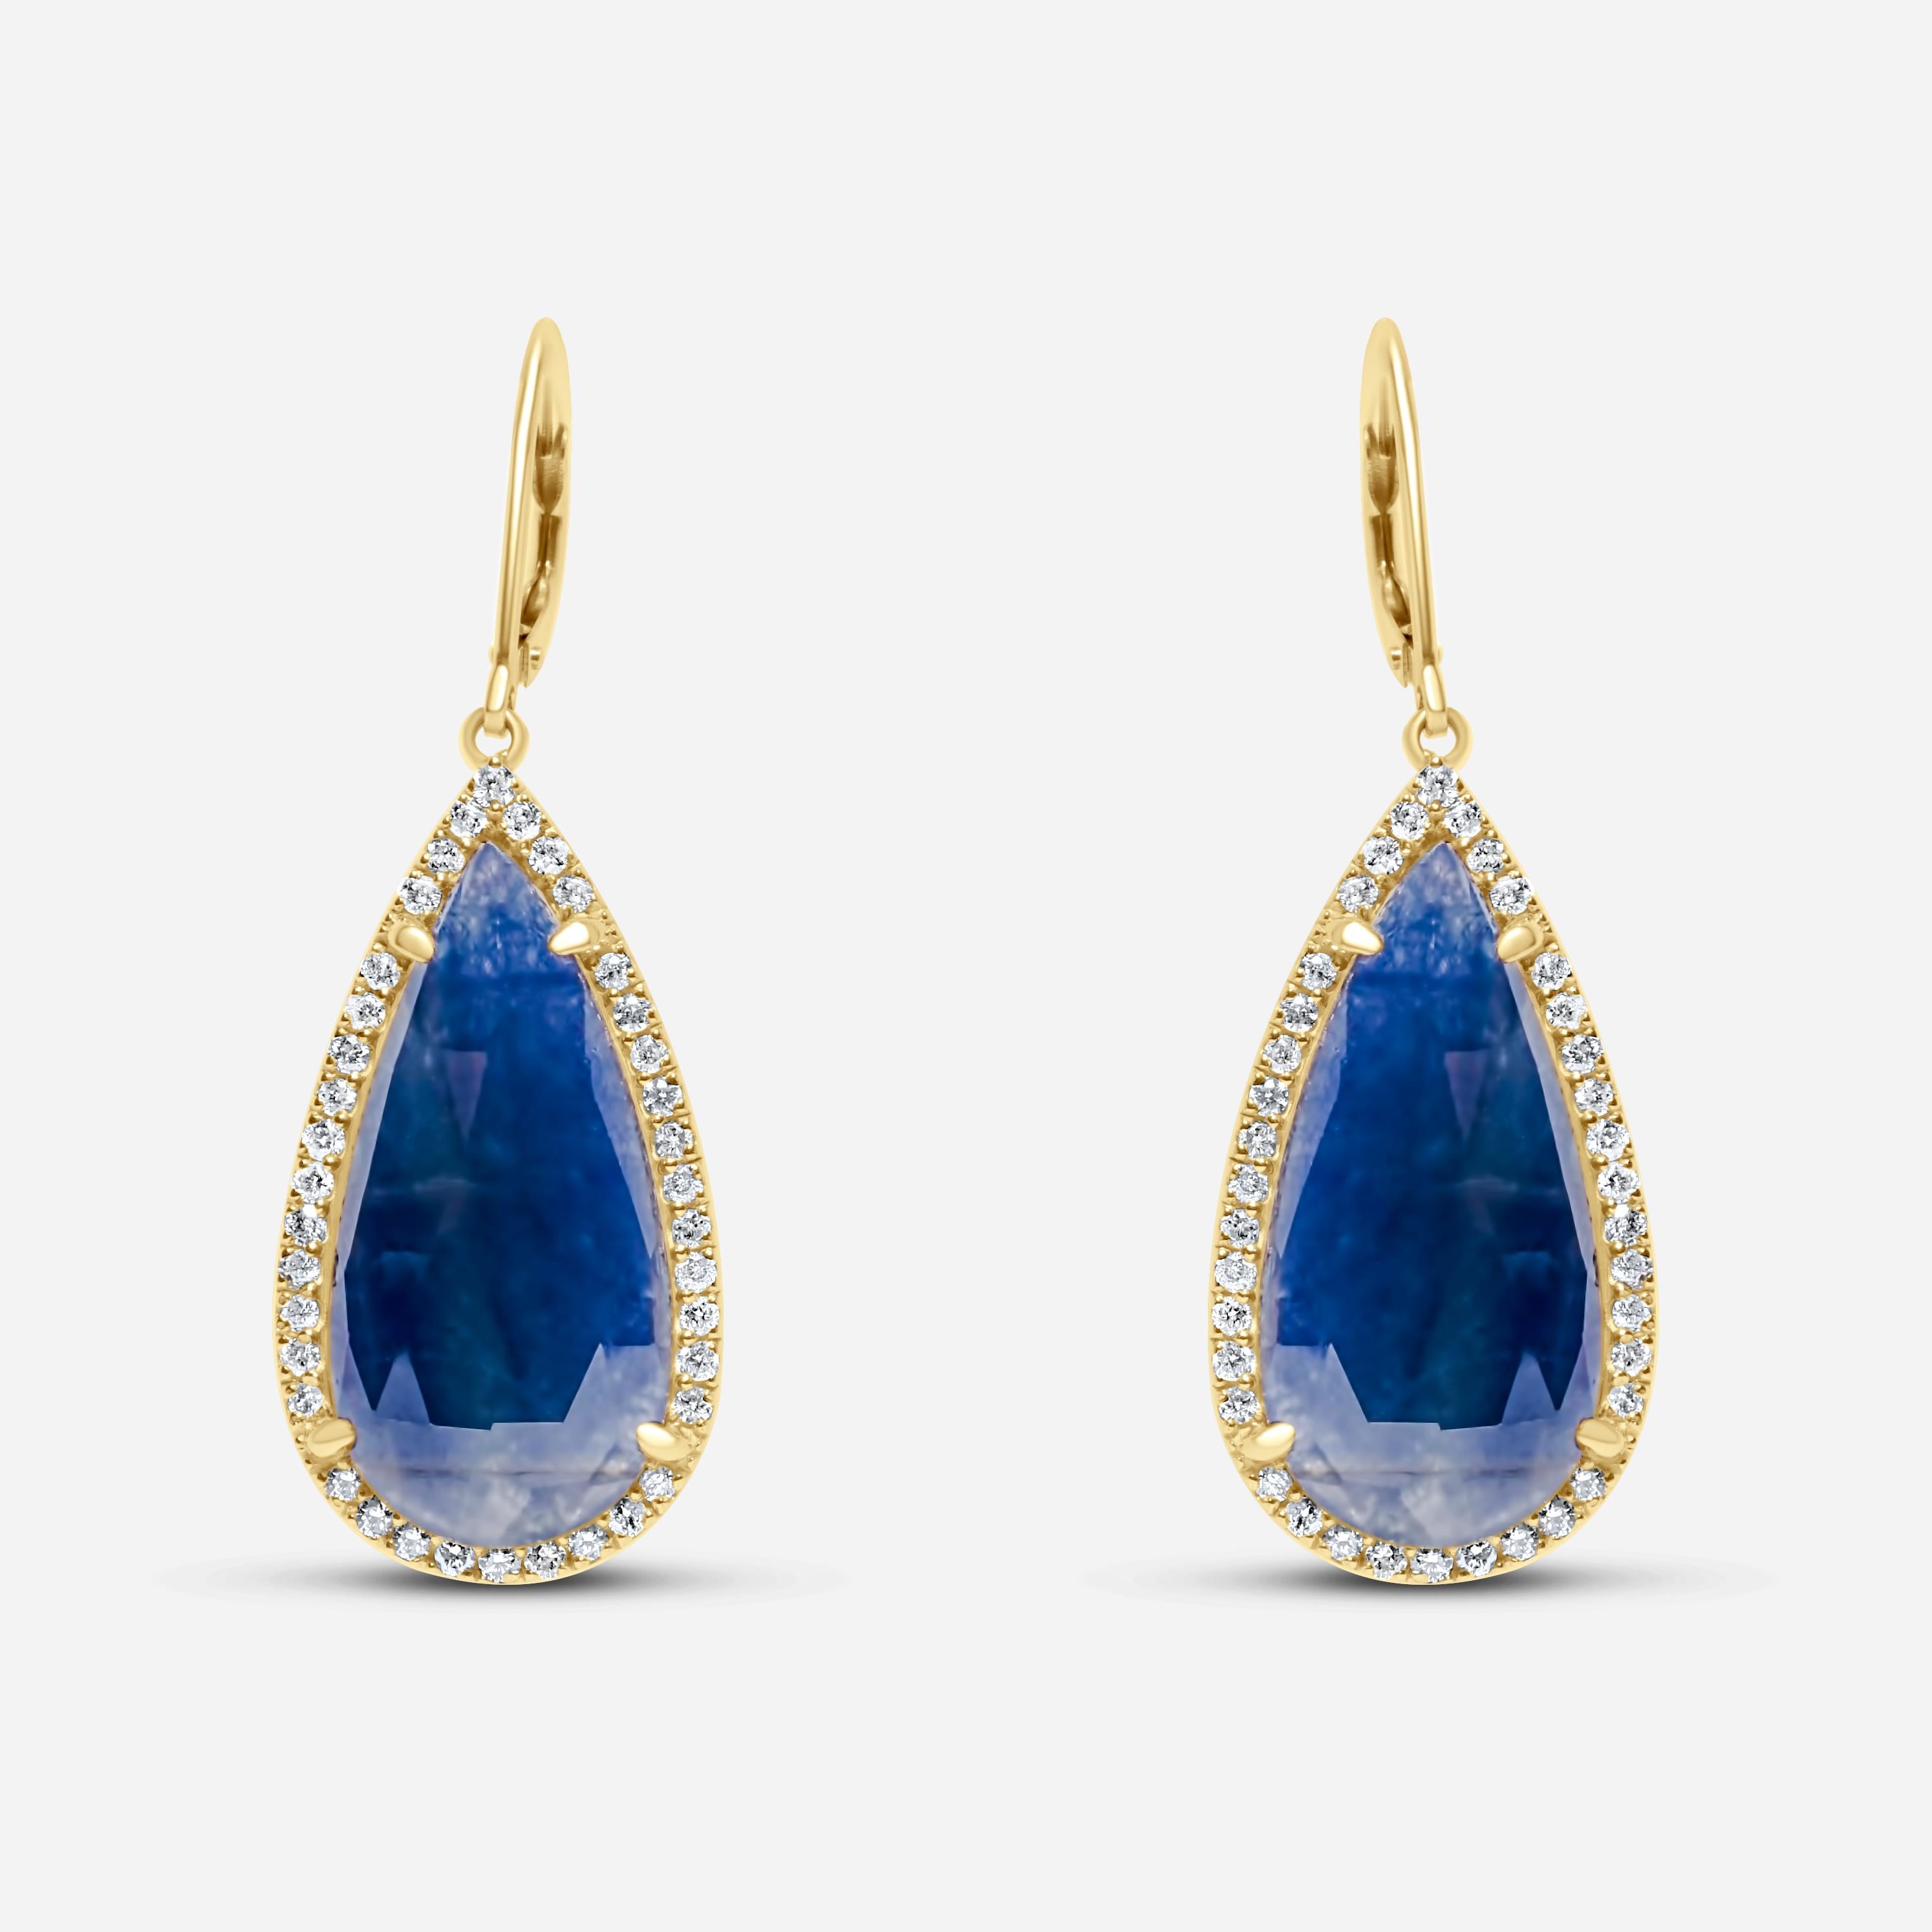 Blue Sapphire Pear Drop Faceted Cabochon Diamond Halo Drop 18K Gold Earrings

18 Karat Yellow Gold
Genuine Sapphire & Diamonds
16.5 CT Sapphires Gemstones
1.00 CTW Diamonds

Important Information:
Please note that this item will take 2-4 weeks to